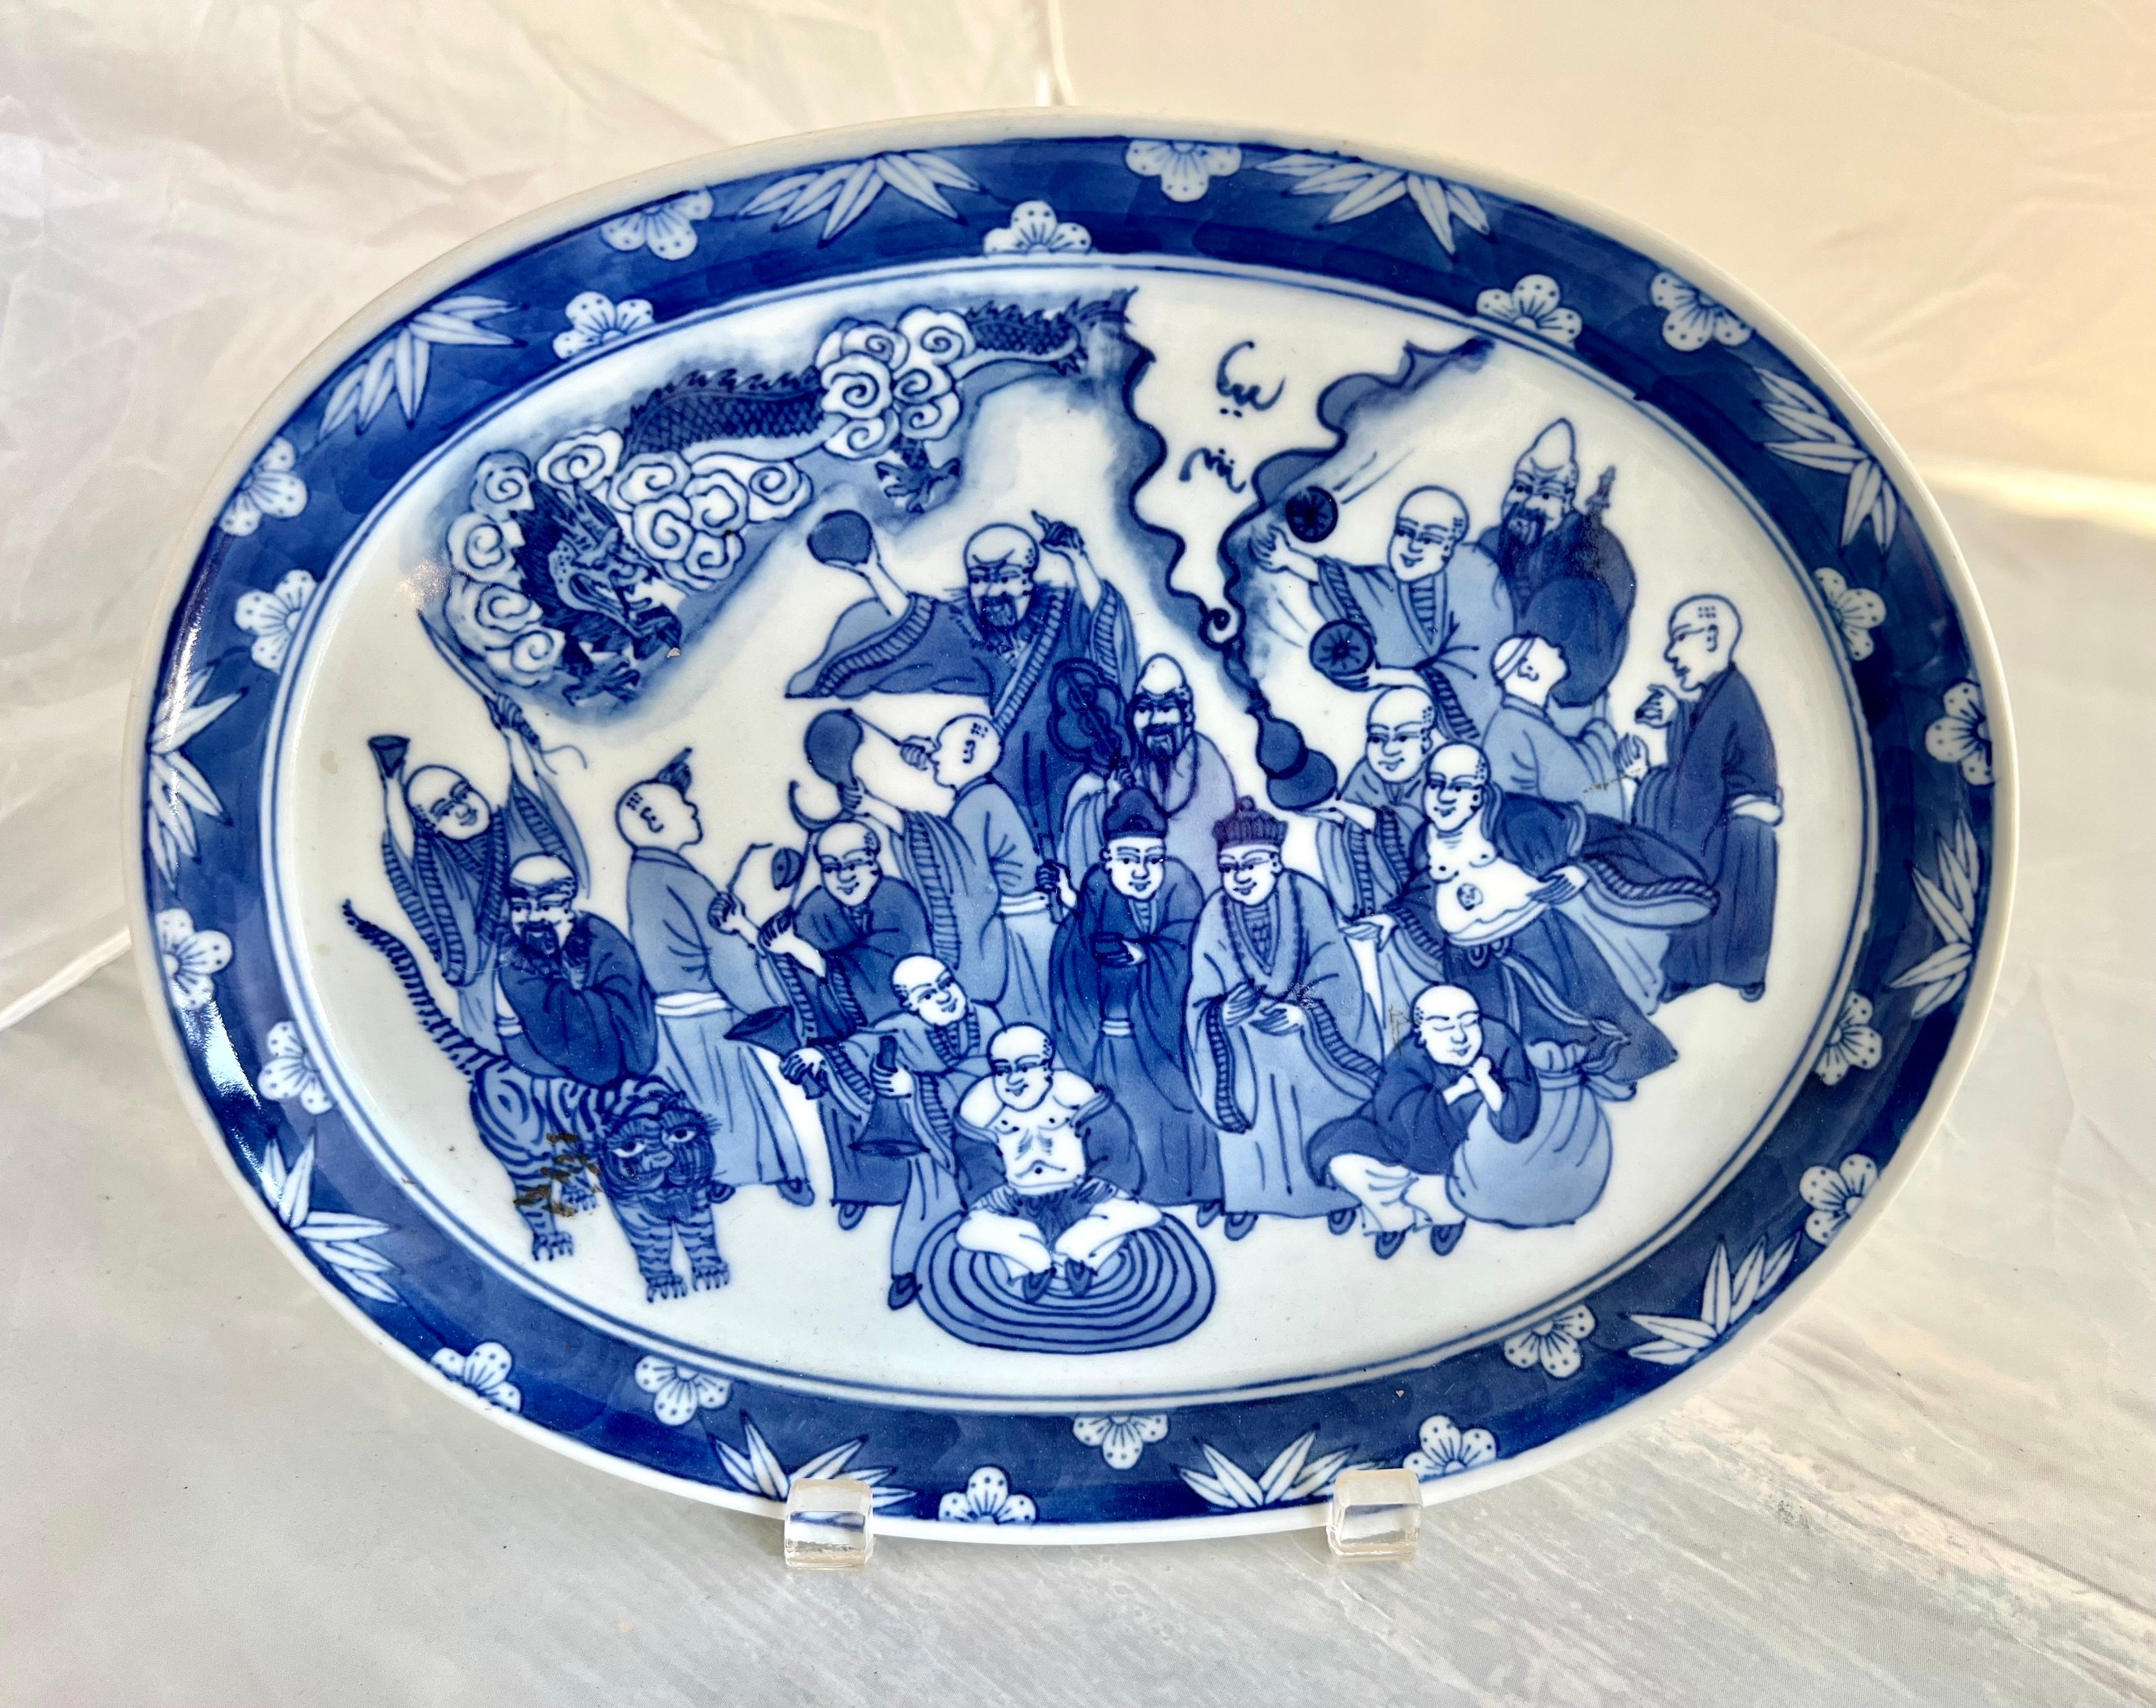 The Chinese export blue & white oval platter featuring depictions of wise men, a tiger, and a dragon likely reflects traditional Chinese symbolism and storytelling.  The combination of these elements could carry cultural significance or represent